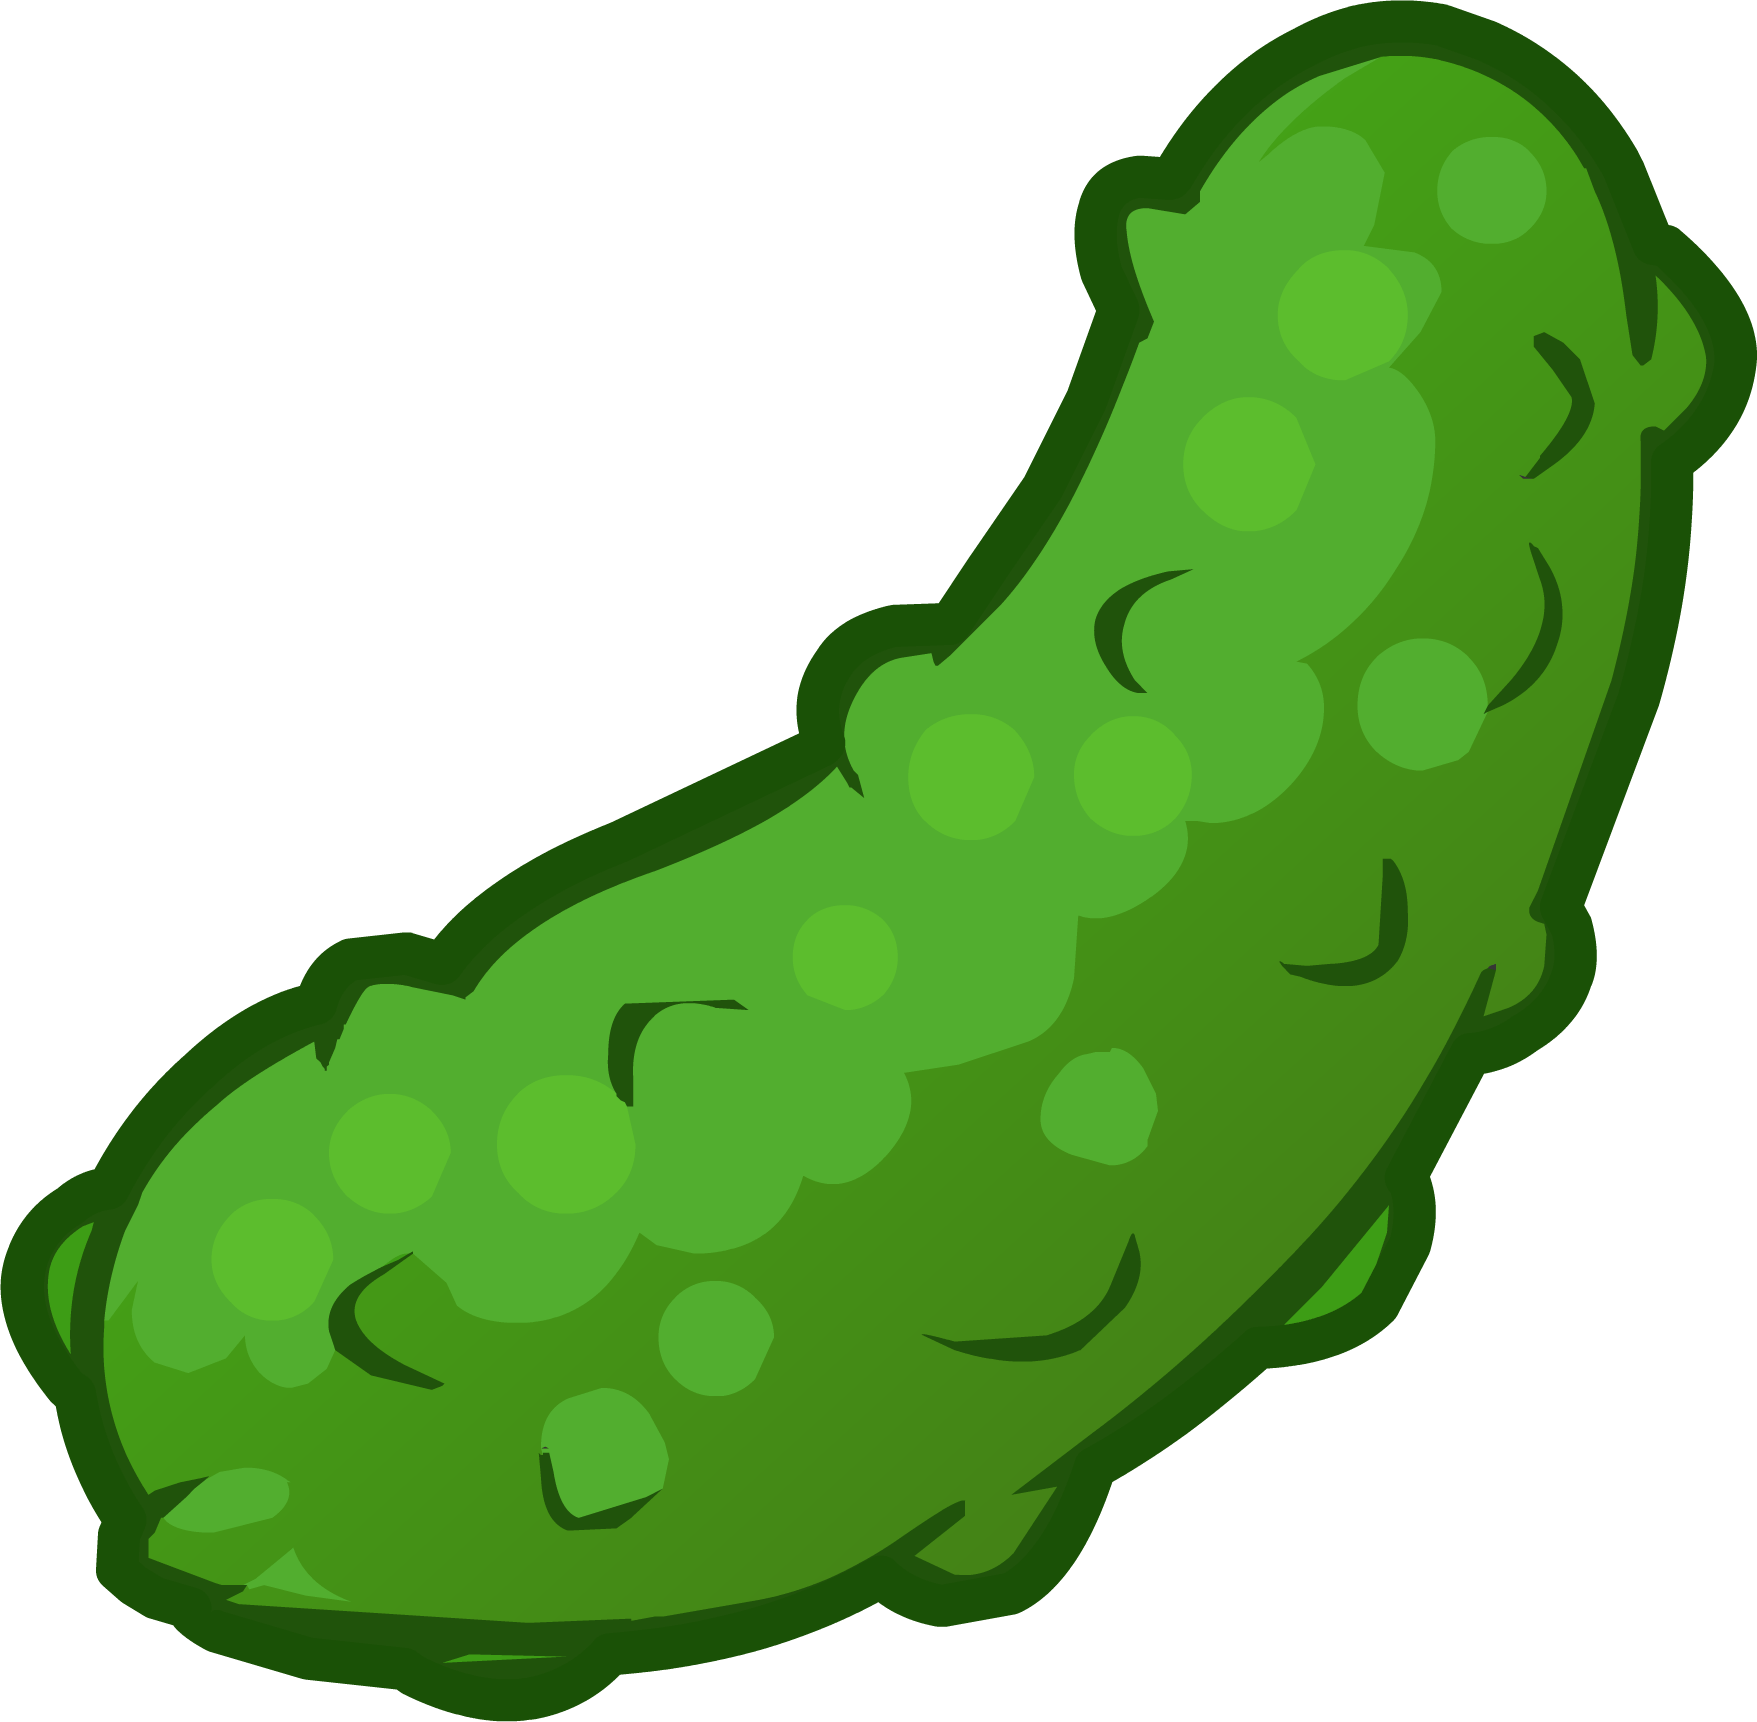 Free Pickles Clipart, Download Free Clip Art, Free Clip Art on.